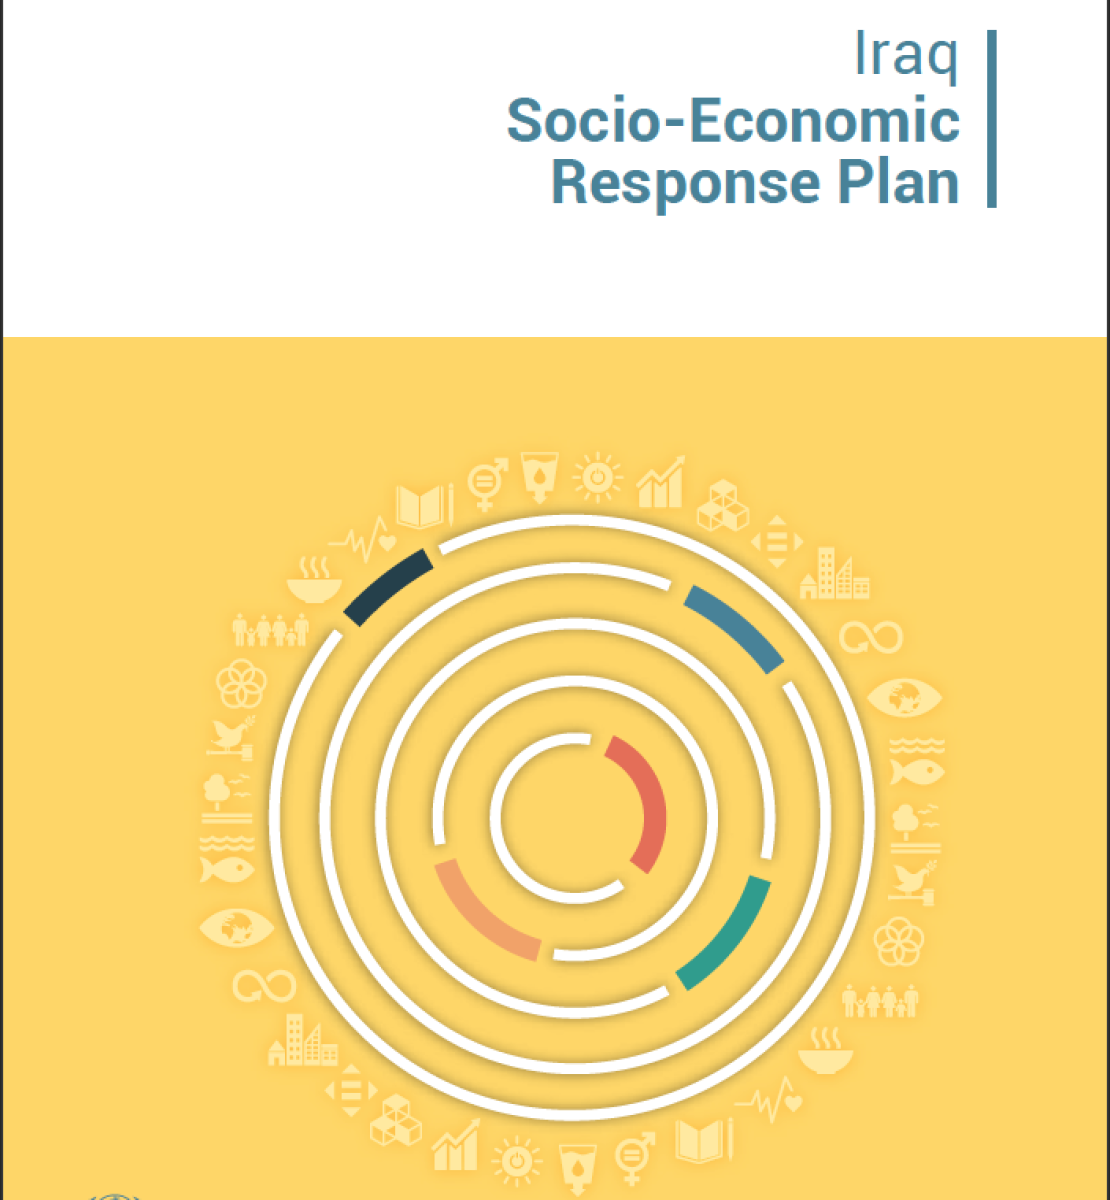 Cover shows the title "Iraq Socio-Economic Response Plan" against white background. Underneath are circular designs with the SDG logos surround them all at the forefront of a yellow background. 